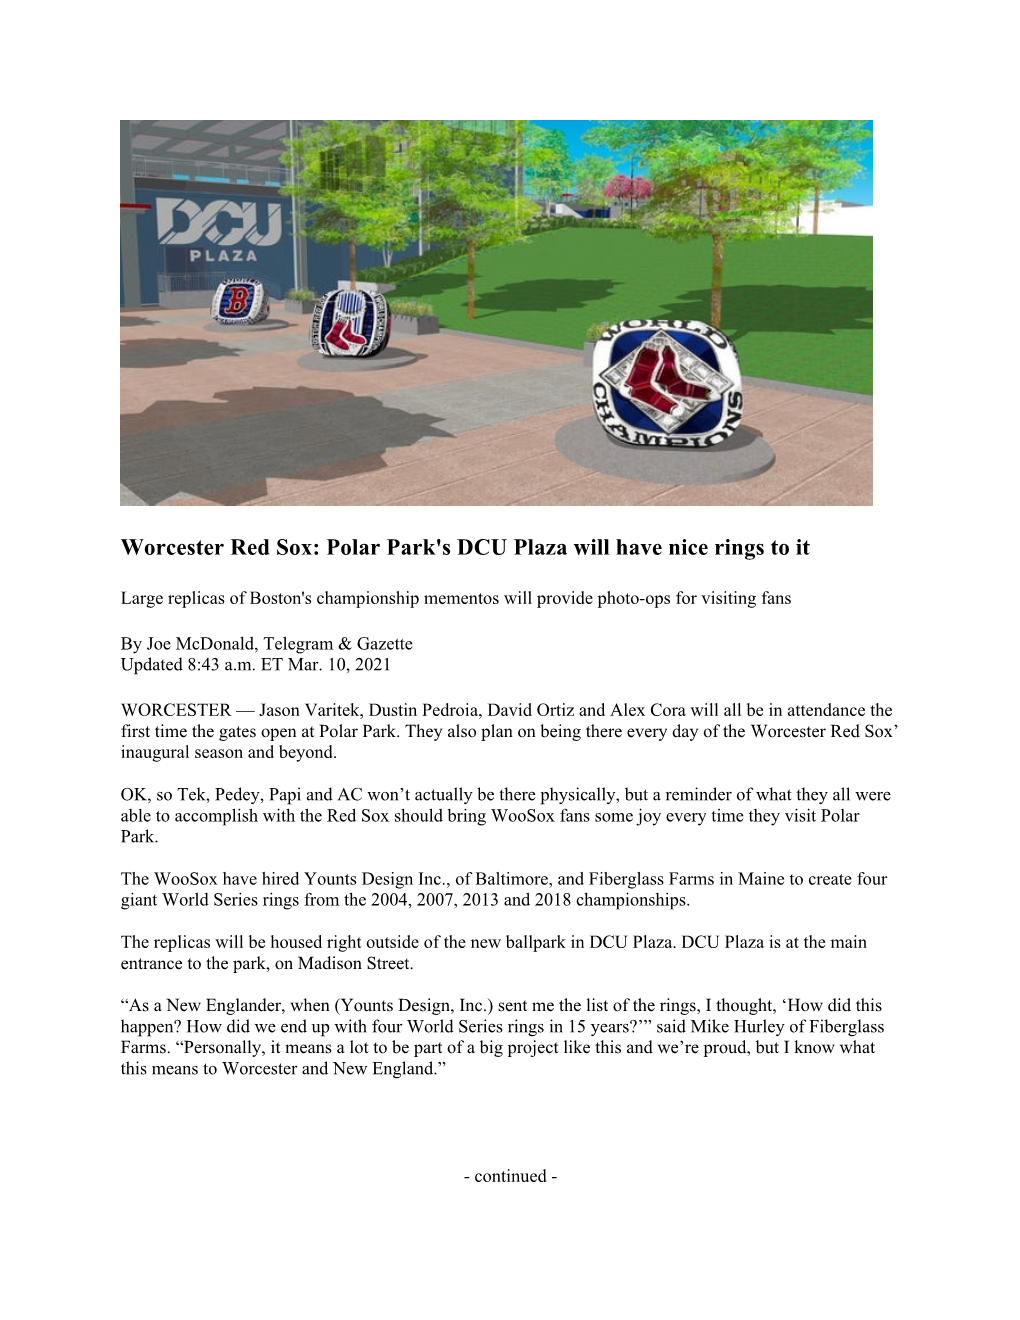 Worcester Red Sox: Polar Park's DCU Plaza Will Have Nice Rings to It